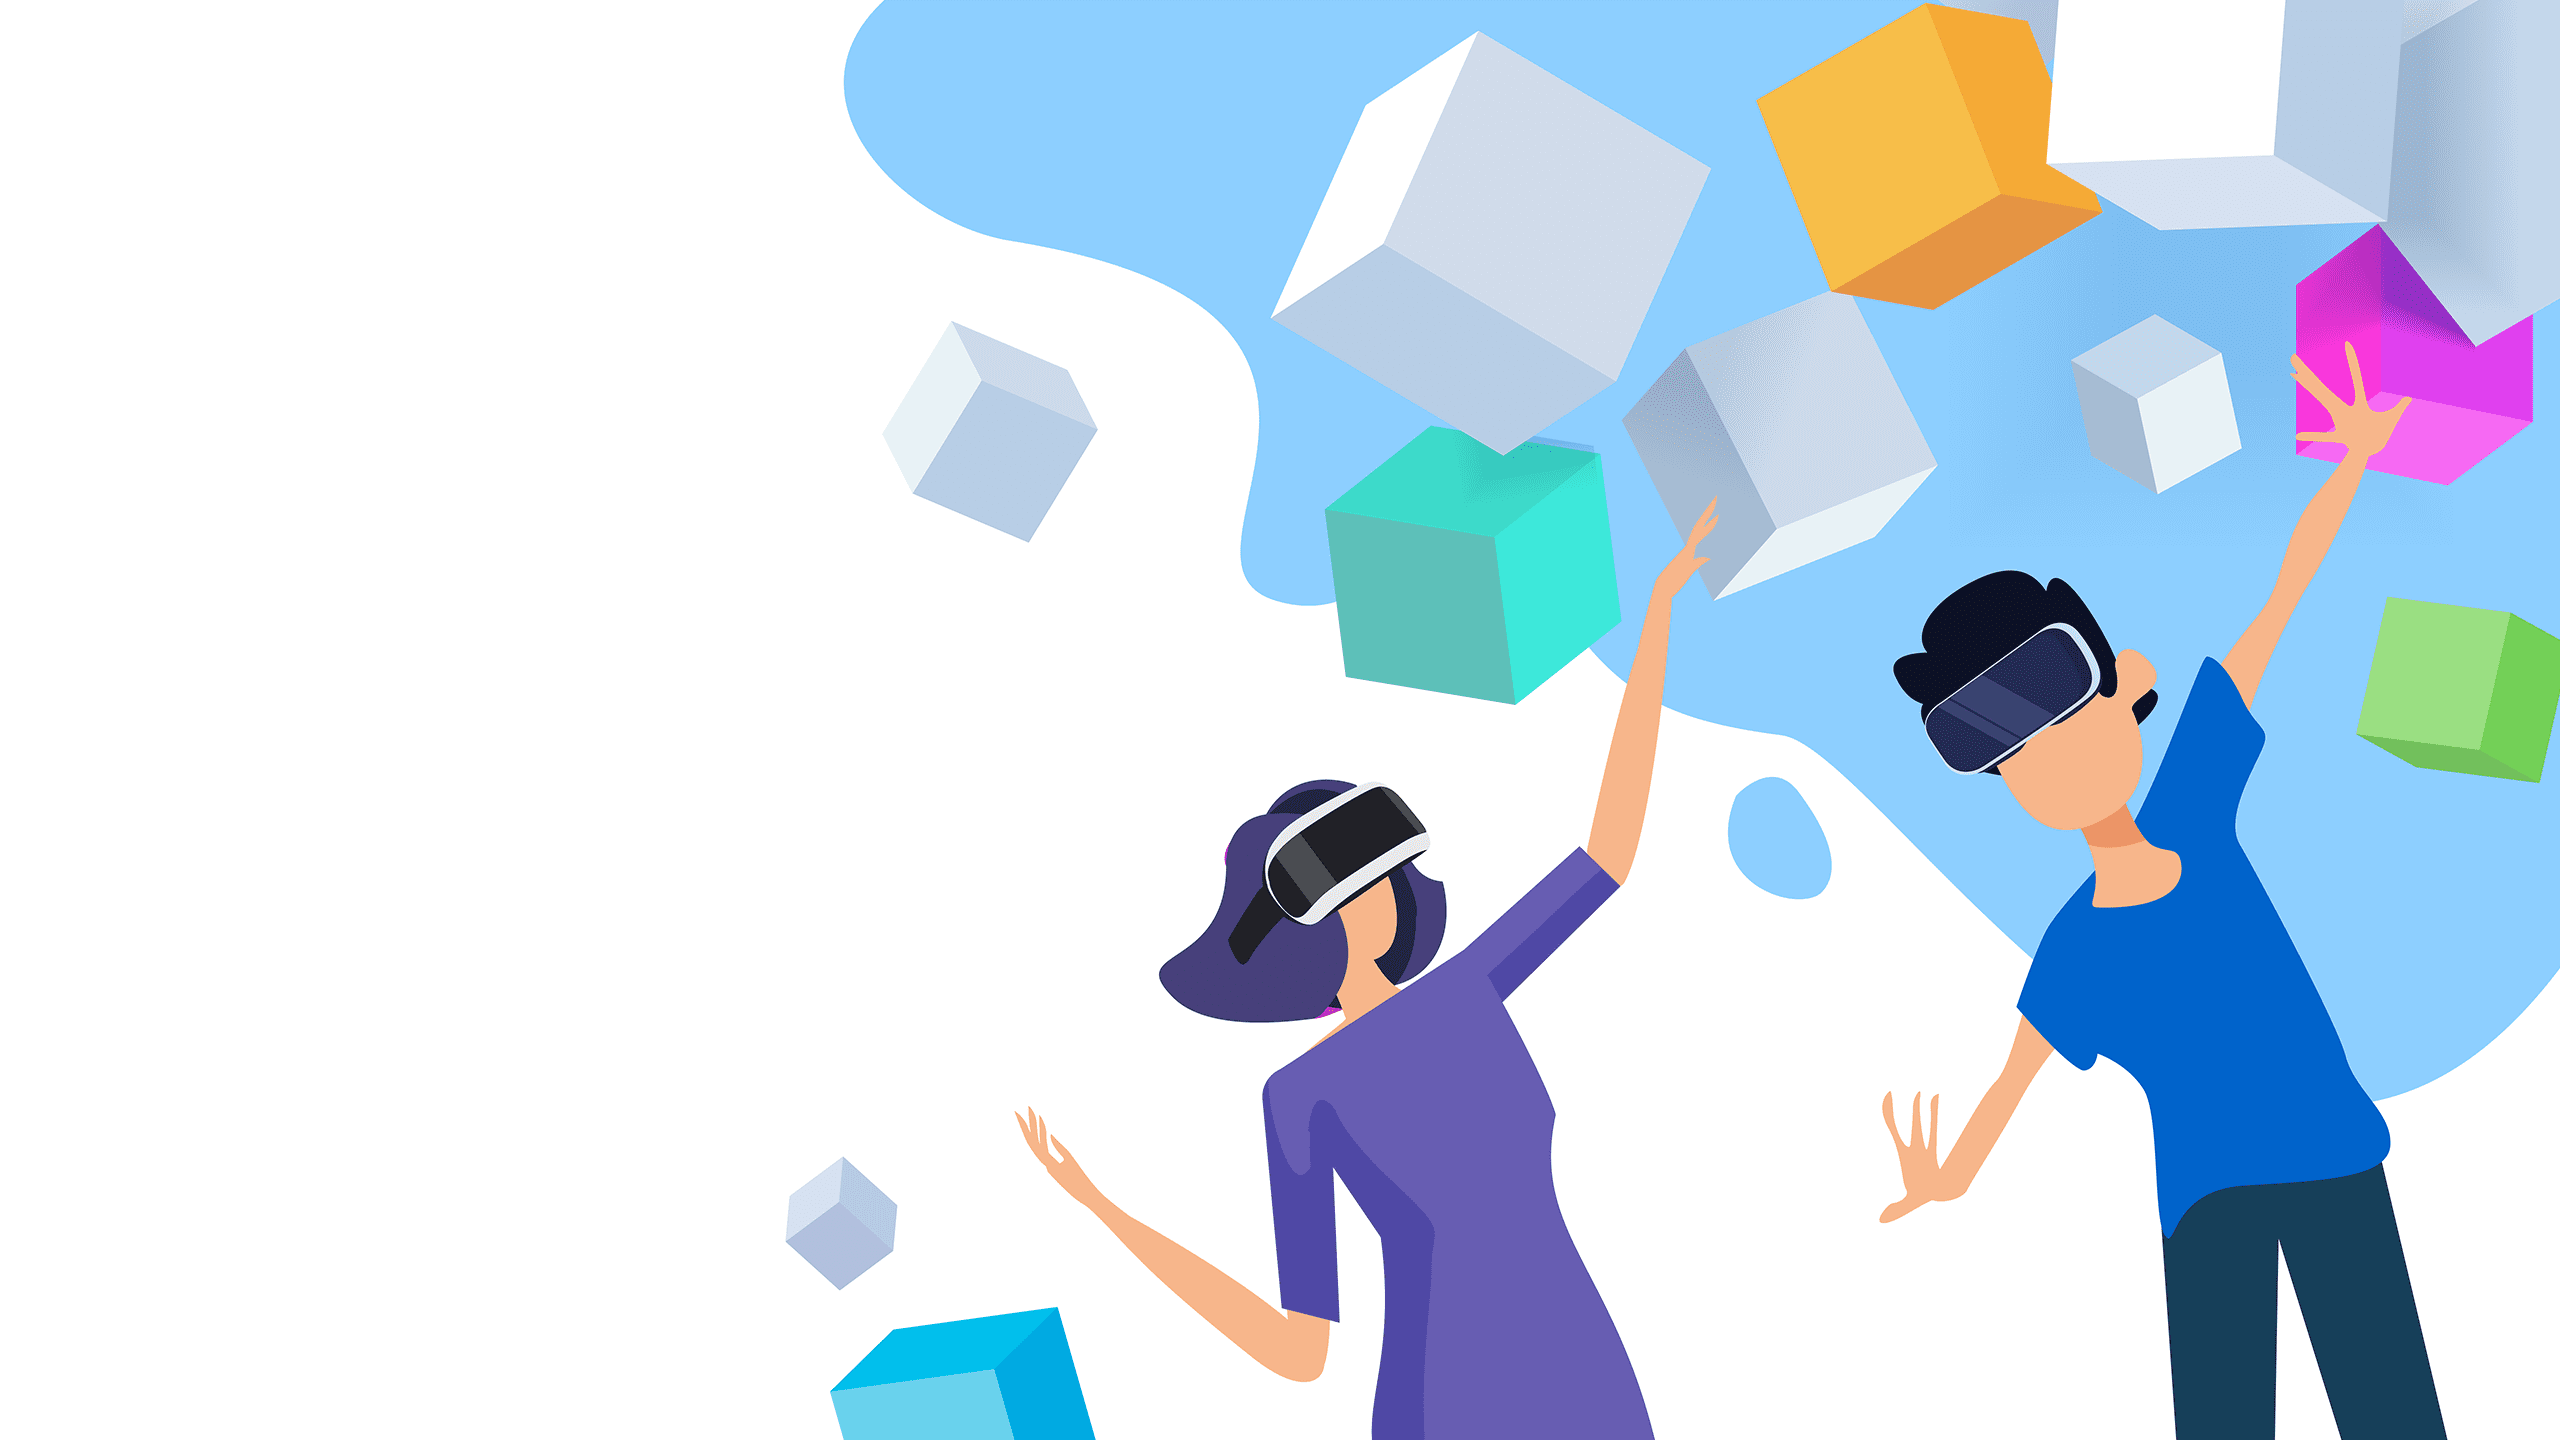 An illustration of people in a virtual reality world wearing business clothes